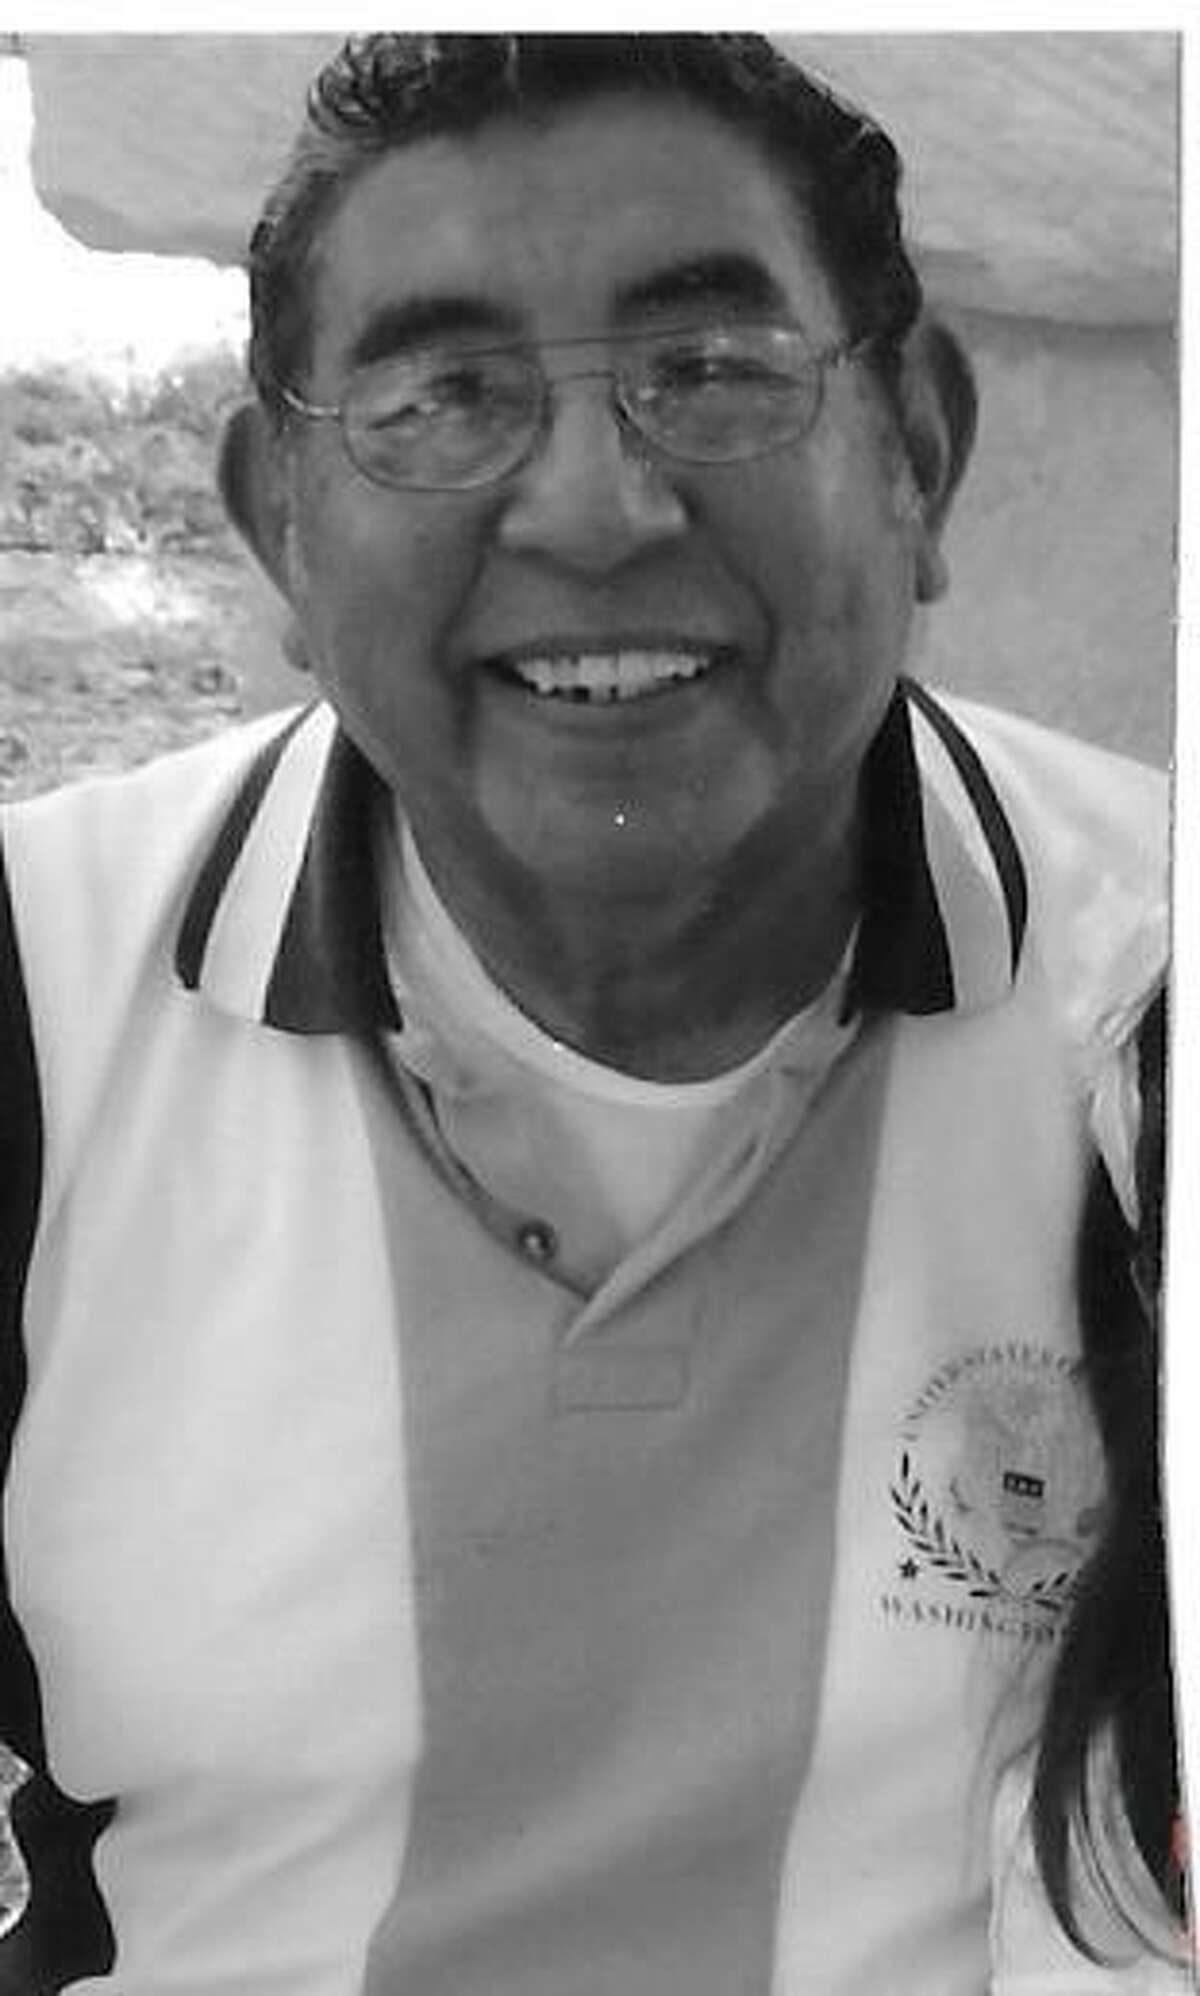 Fernando J. Medellin Sr., a Marine Corps veteran who served as a reservist while working at Kelly AFB, died June 8 at 83.